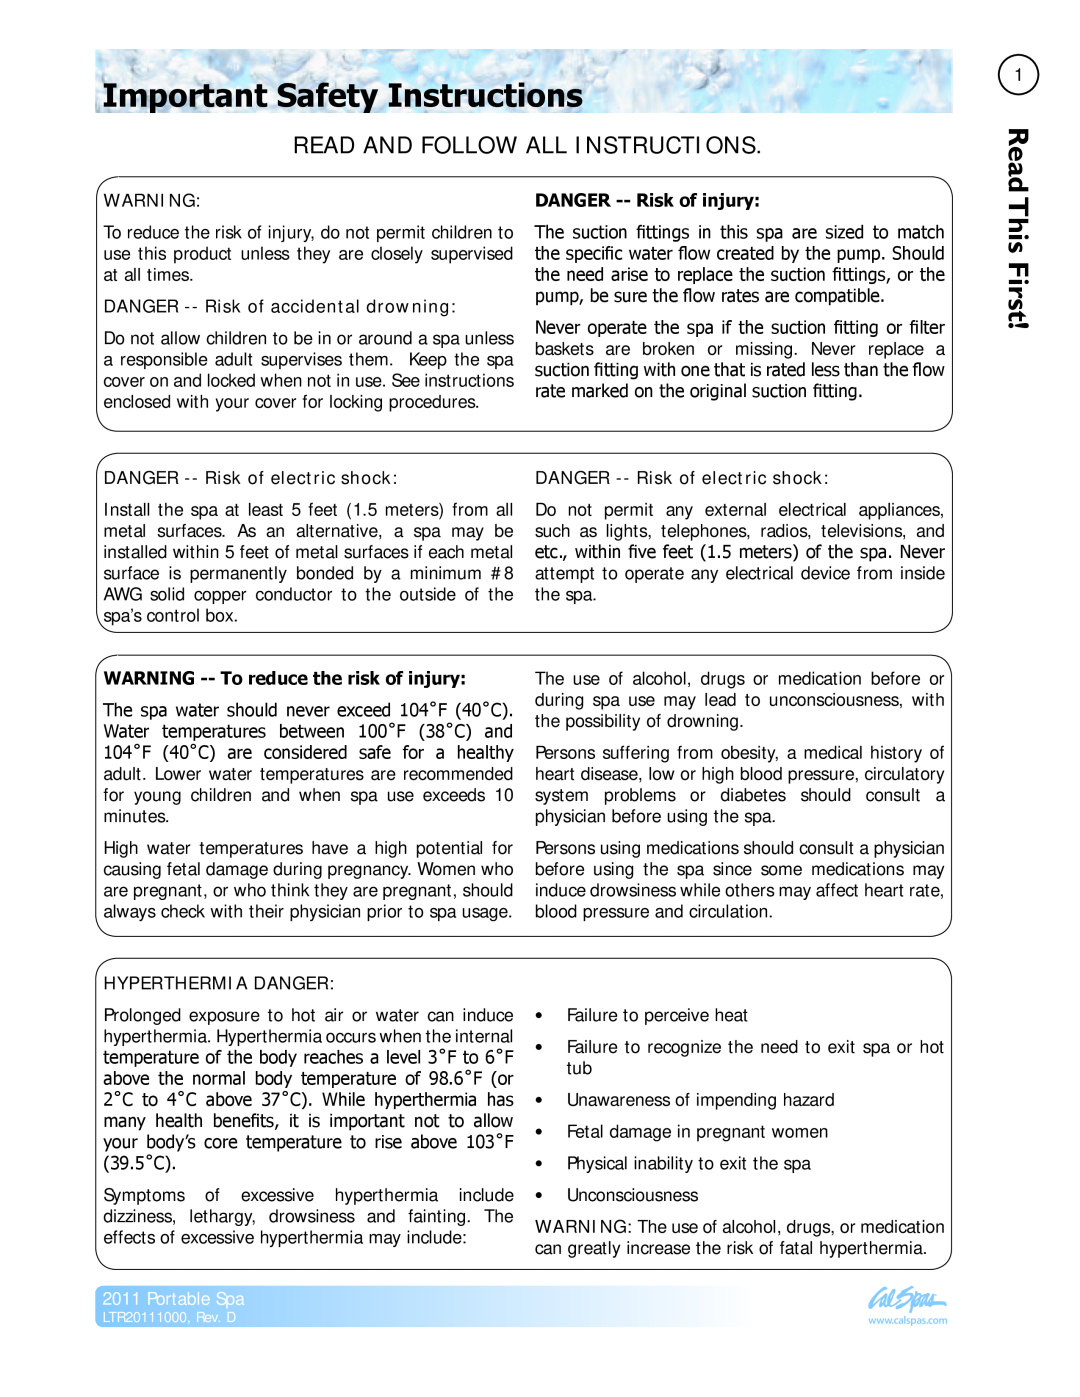 Cal Spas LTR20111000 manual Important Safety Instructions, This First, Read And Follow All Instructions, Portable Spa 